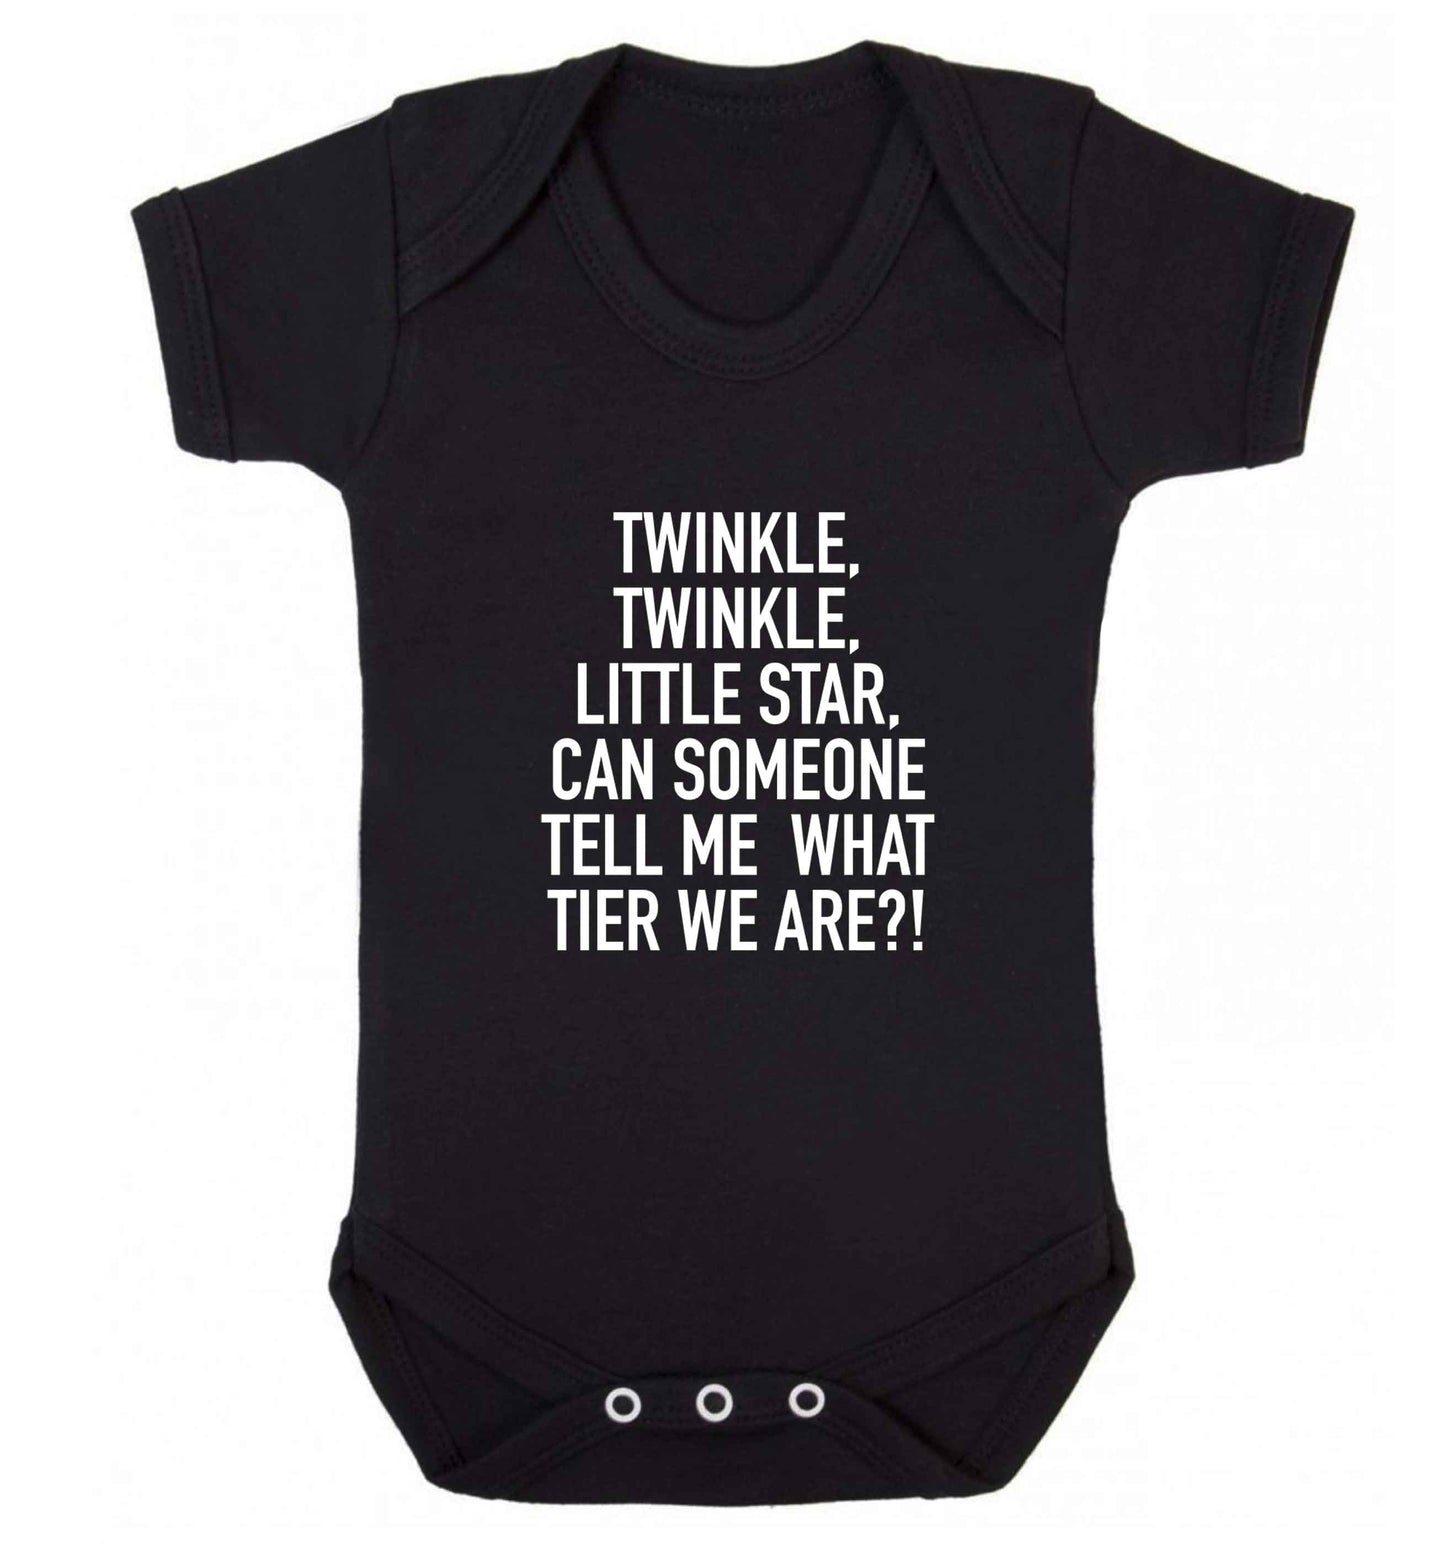 Twinkle twinkle, little star does anyone know what tier we are? baby vest black 18-24 months